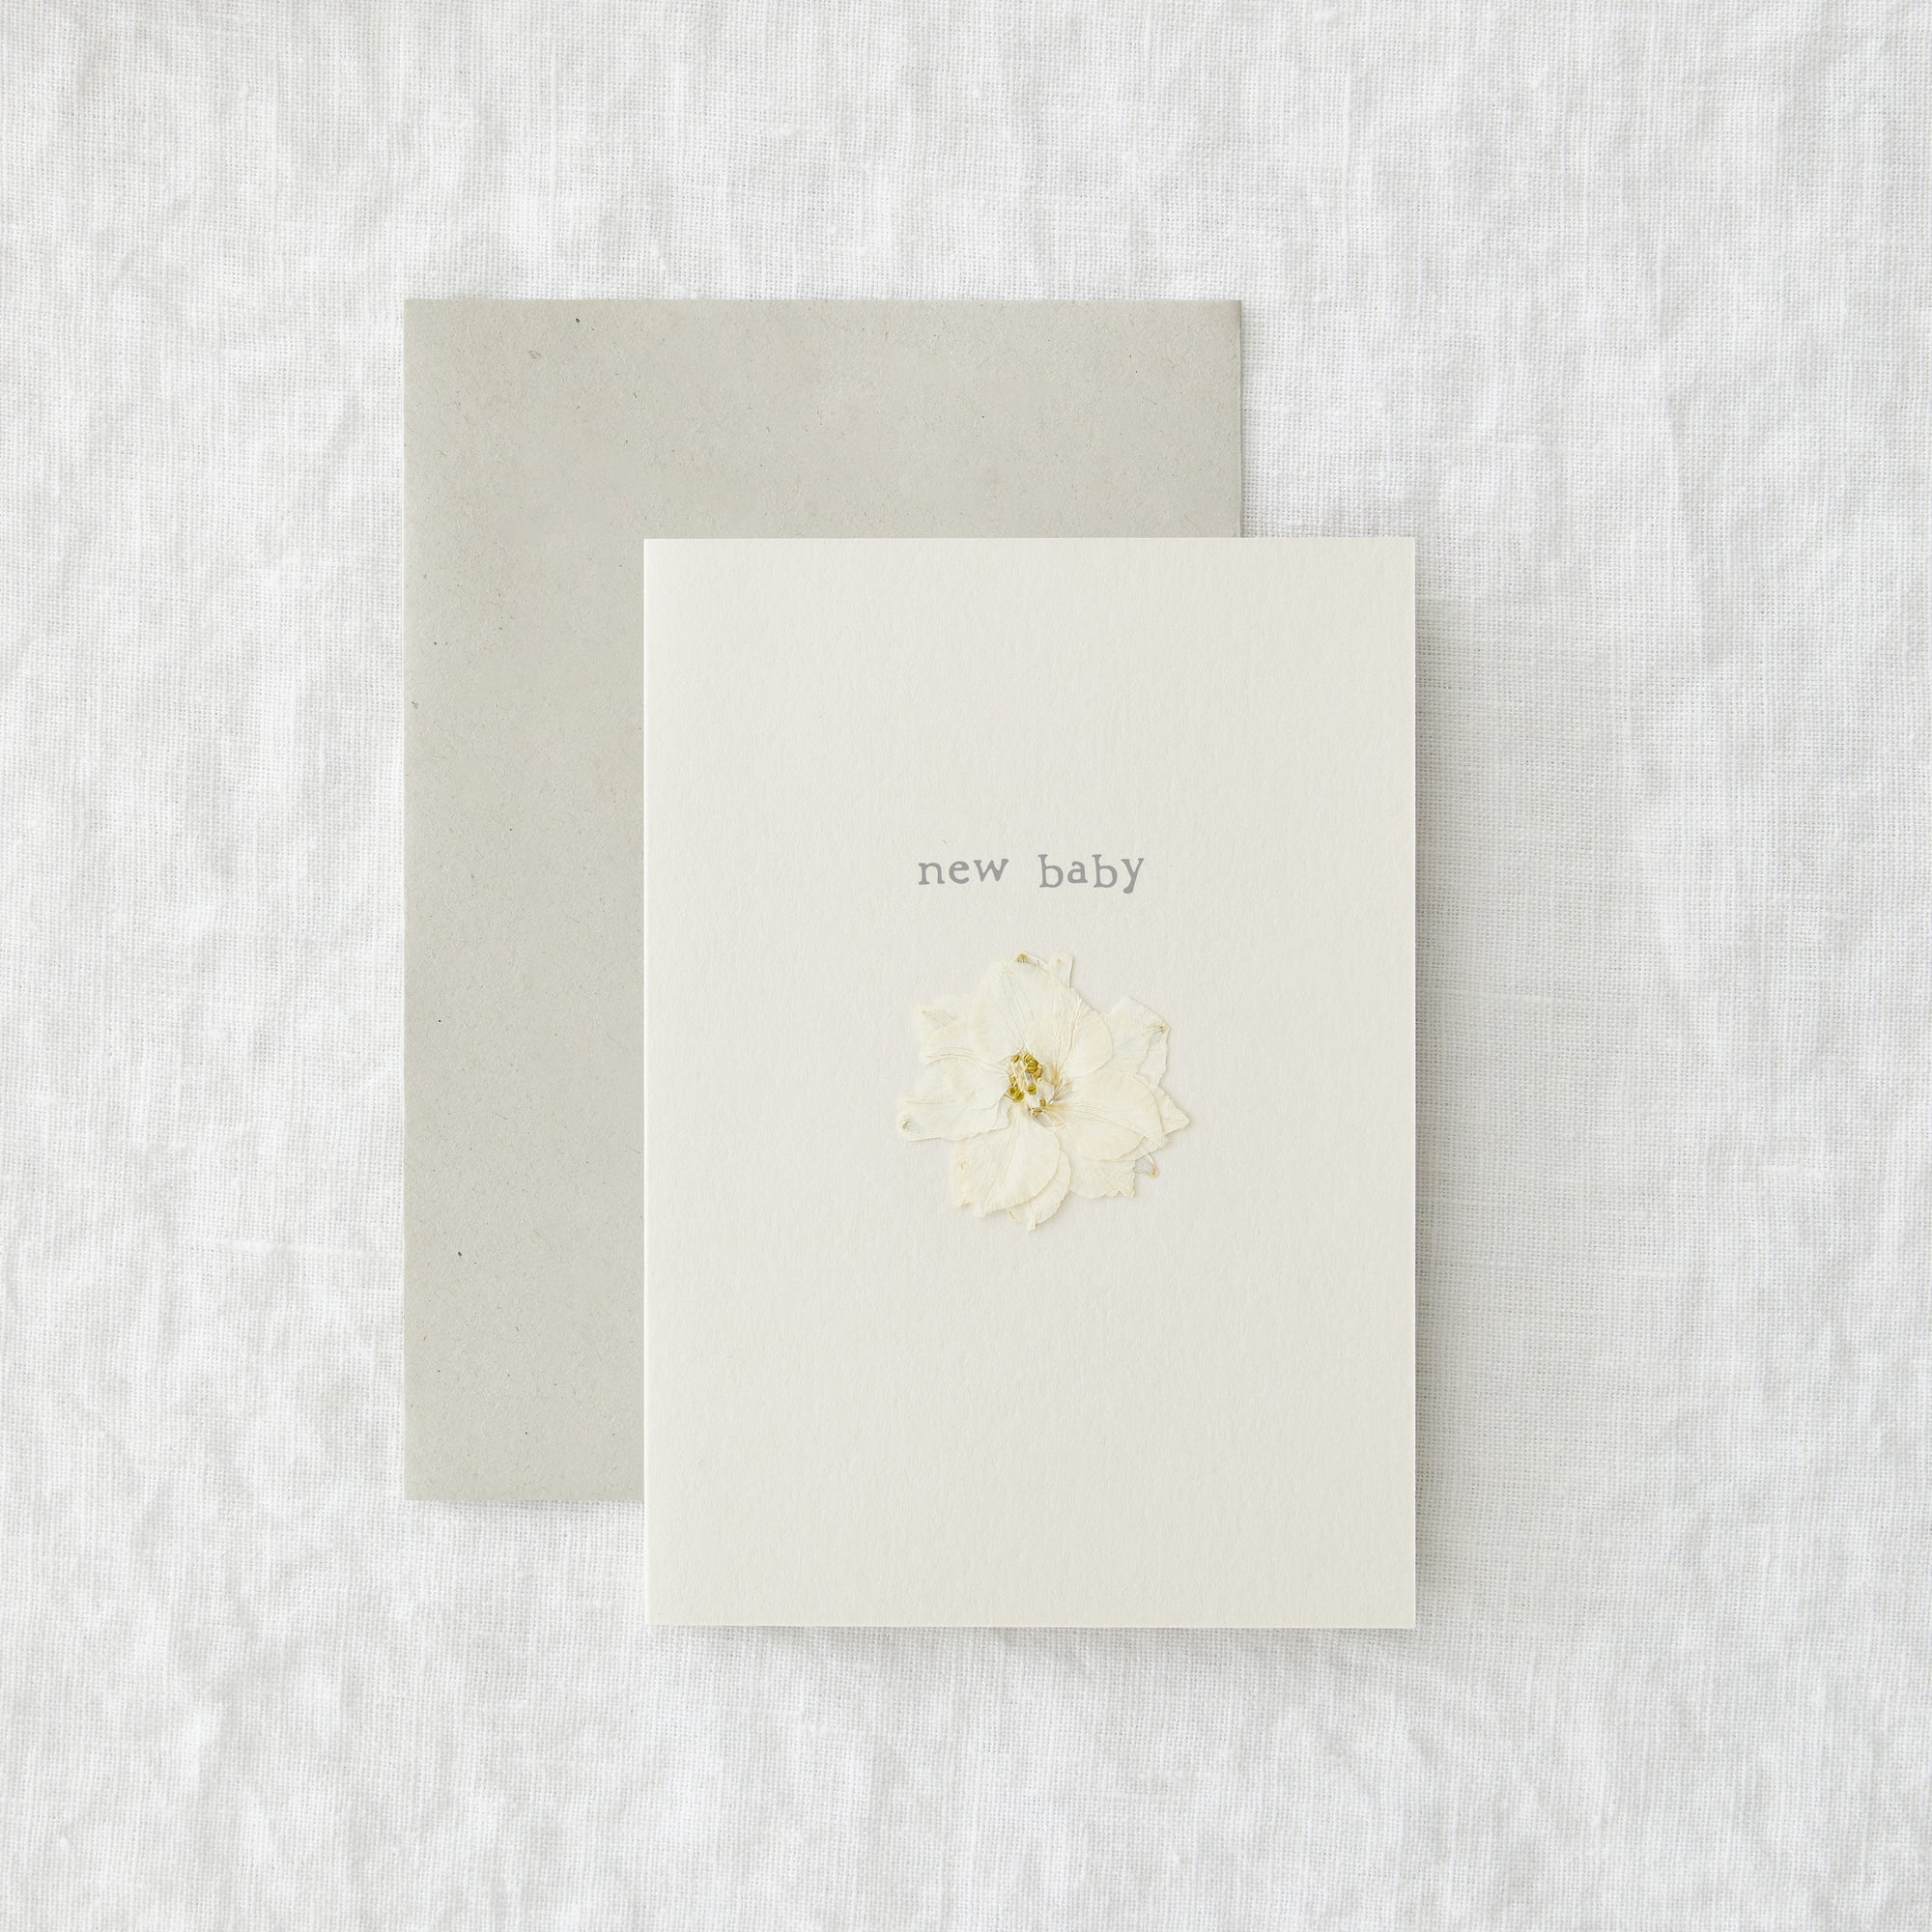 New Baby Pressed Flower Card by penny black